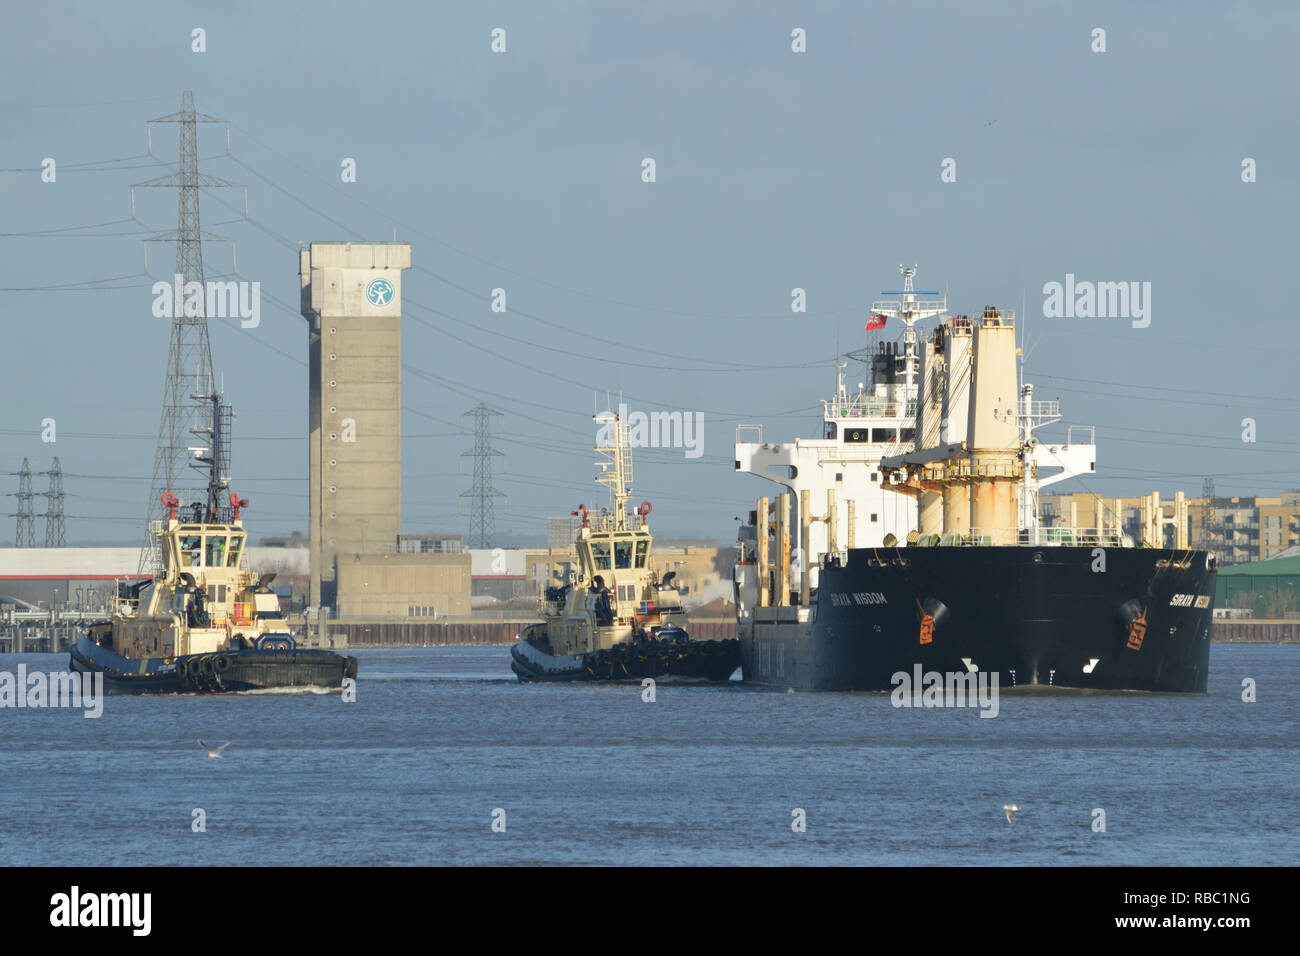 Two Svitzer Global tugs help bulk carrier Siraya Wisdom prepare to moor at a berth on the river Thames in London Stock Photo